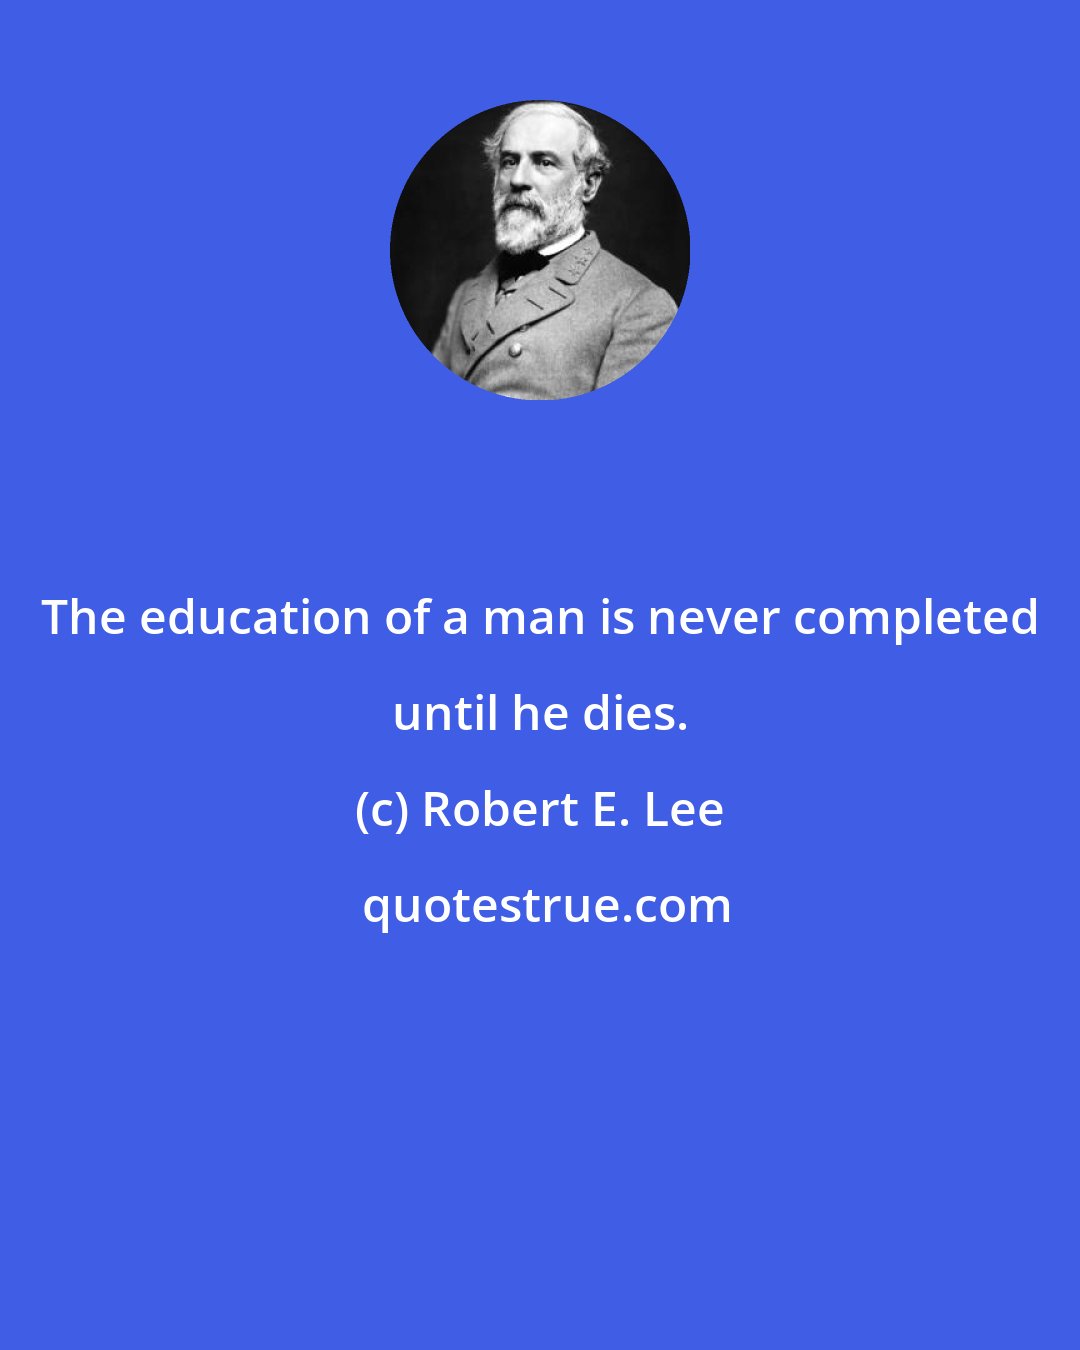 Robert E. Lee: The education of a man is never completed until he dies.